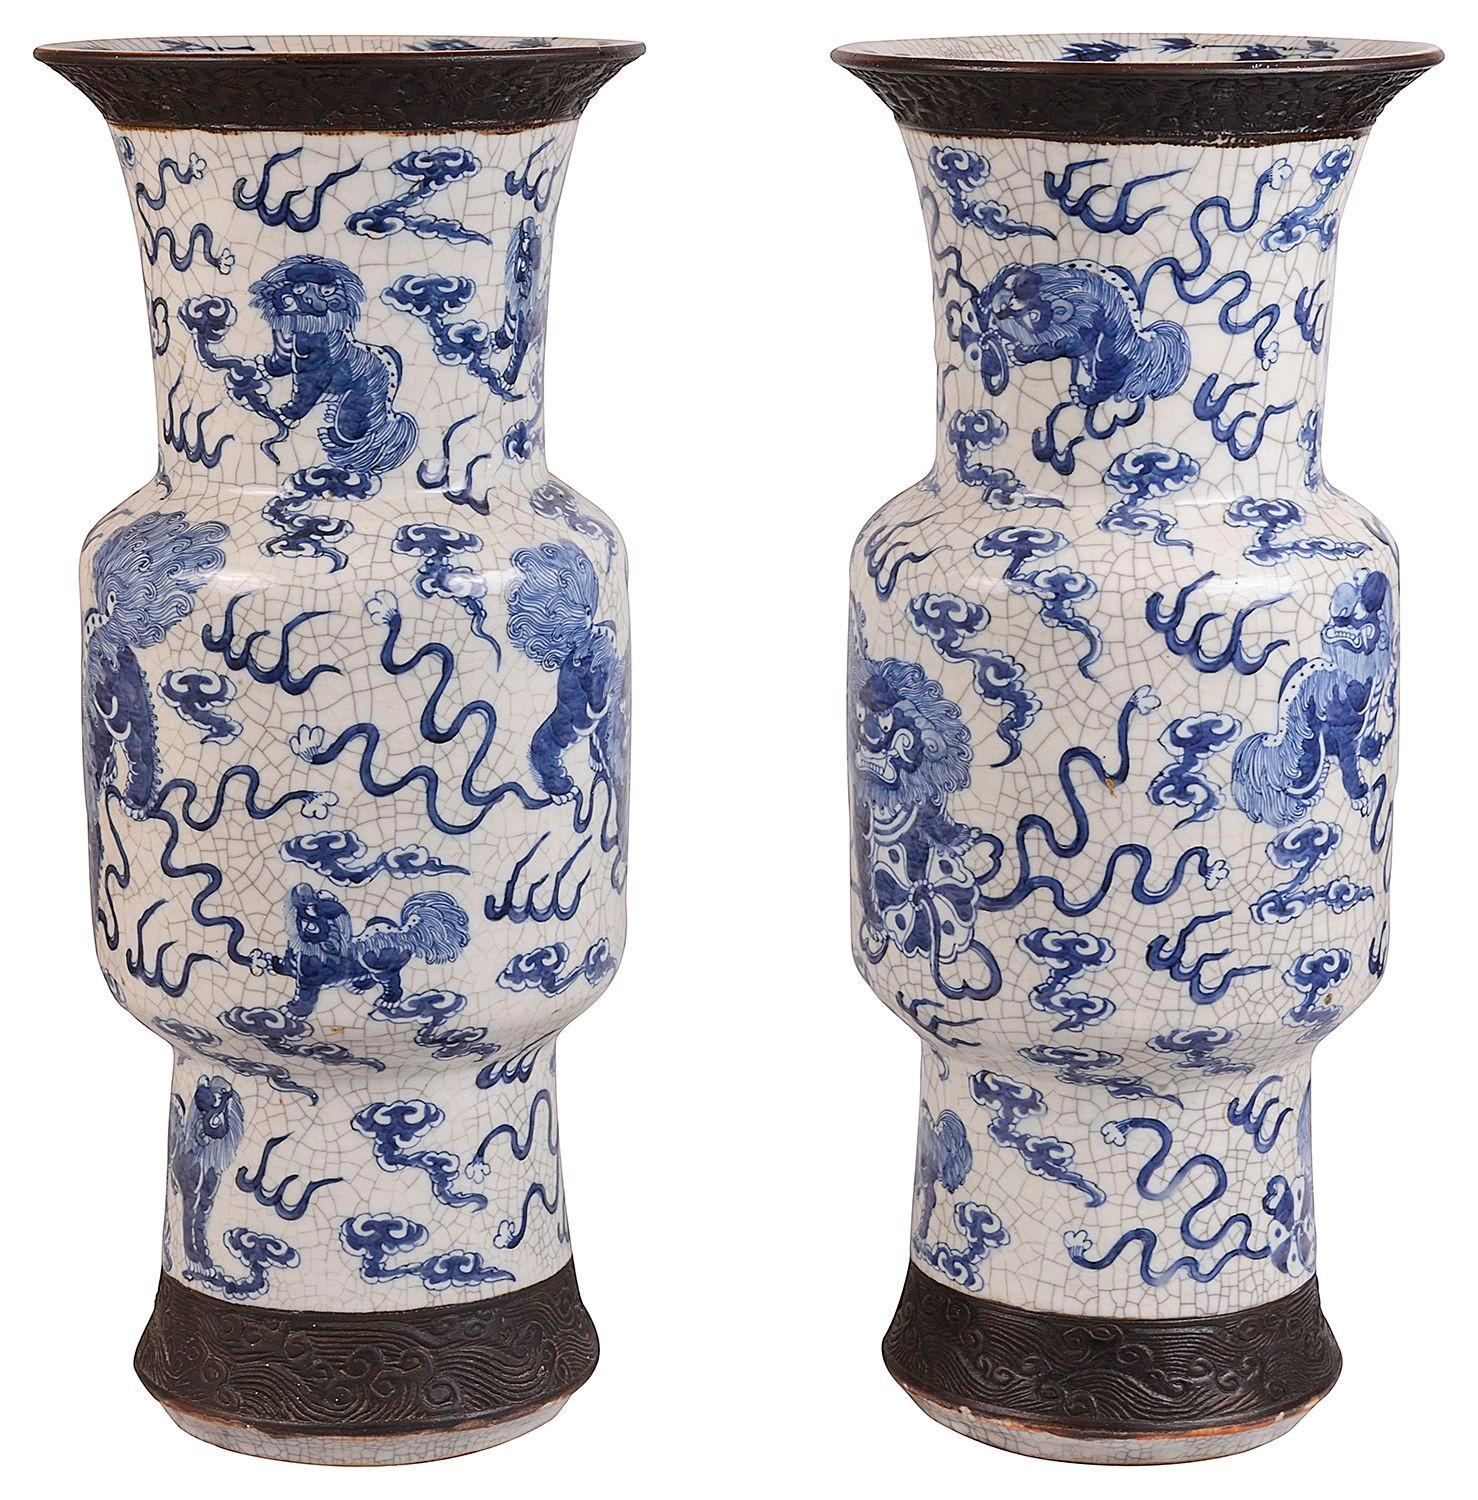 A good quality large and impressive pair of Chinese 19th century blue and white crackelware vases. Each Earthenware boarders top and bottom with sea scrolls. Mythical dragon and dogs amongst clouds and snakes.

Batch 72